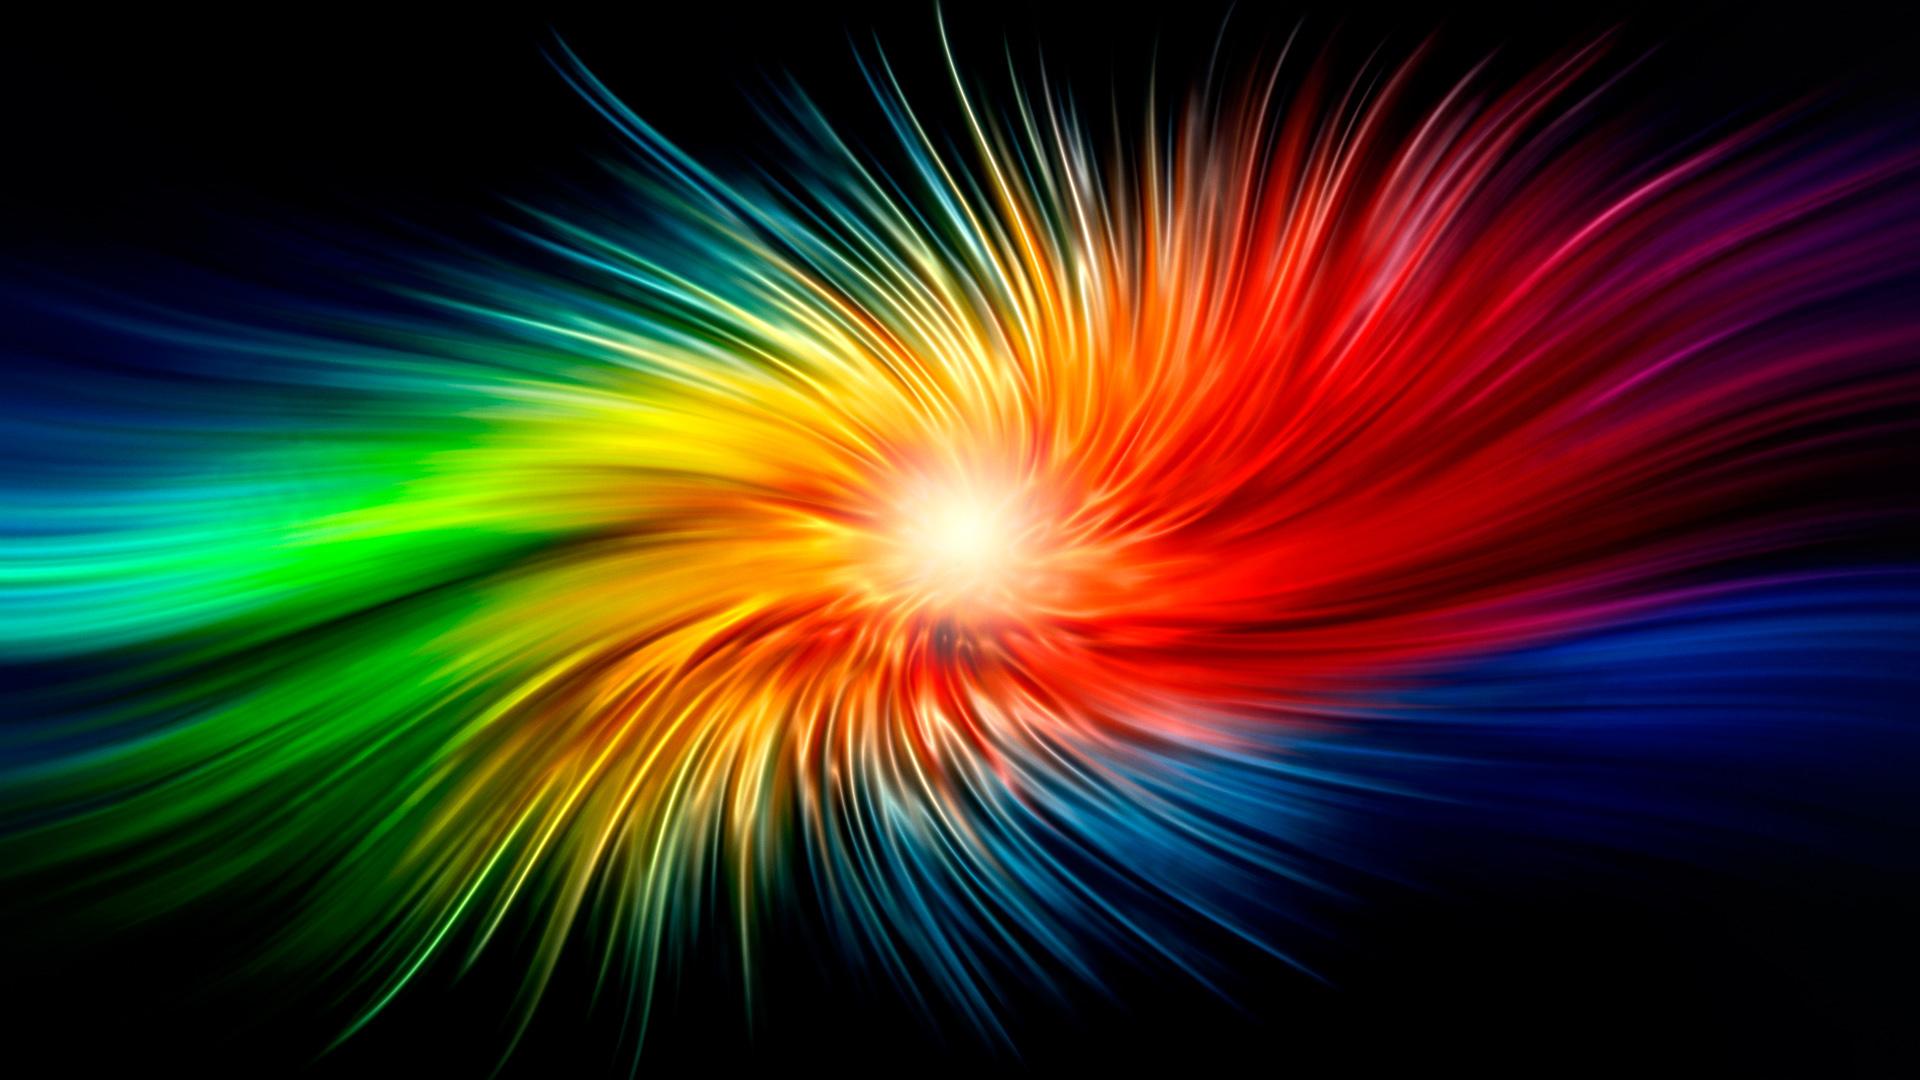 awesome colorful backgrounds hd wallpapersjpg